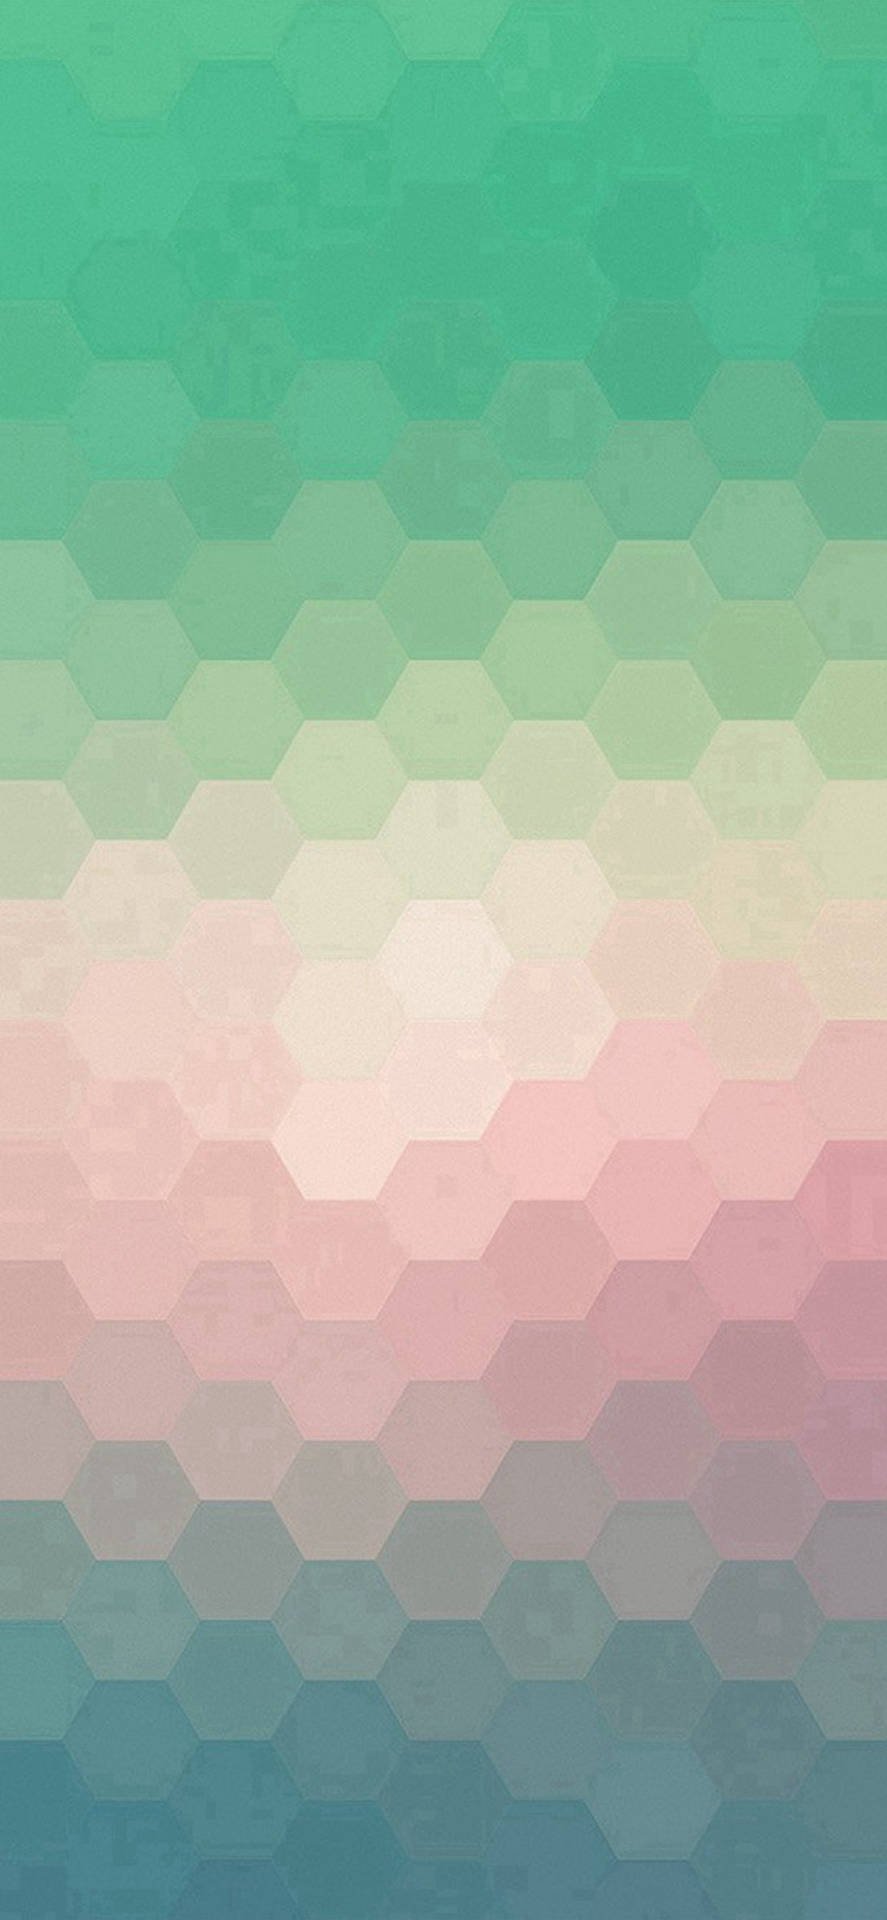 Colorful Geometric Patterns Cool Android Background